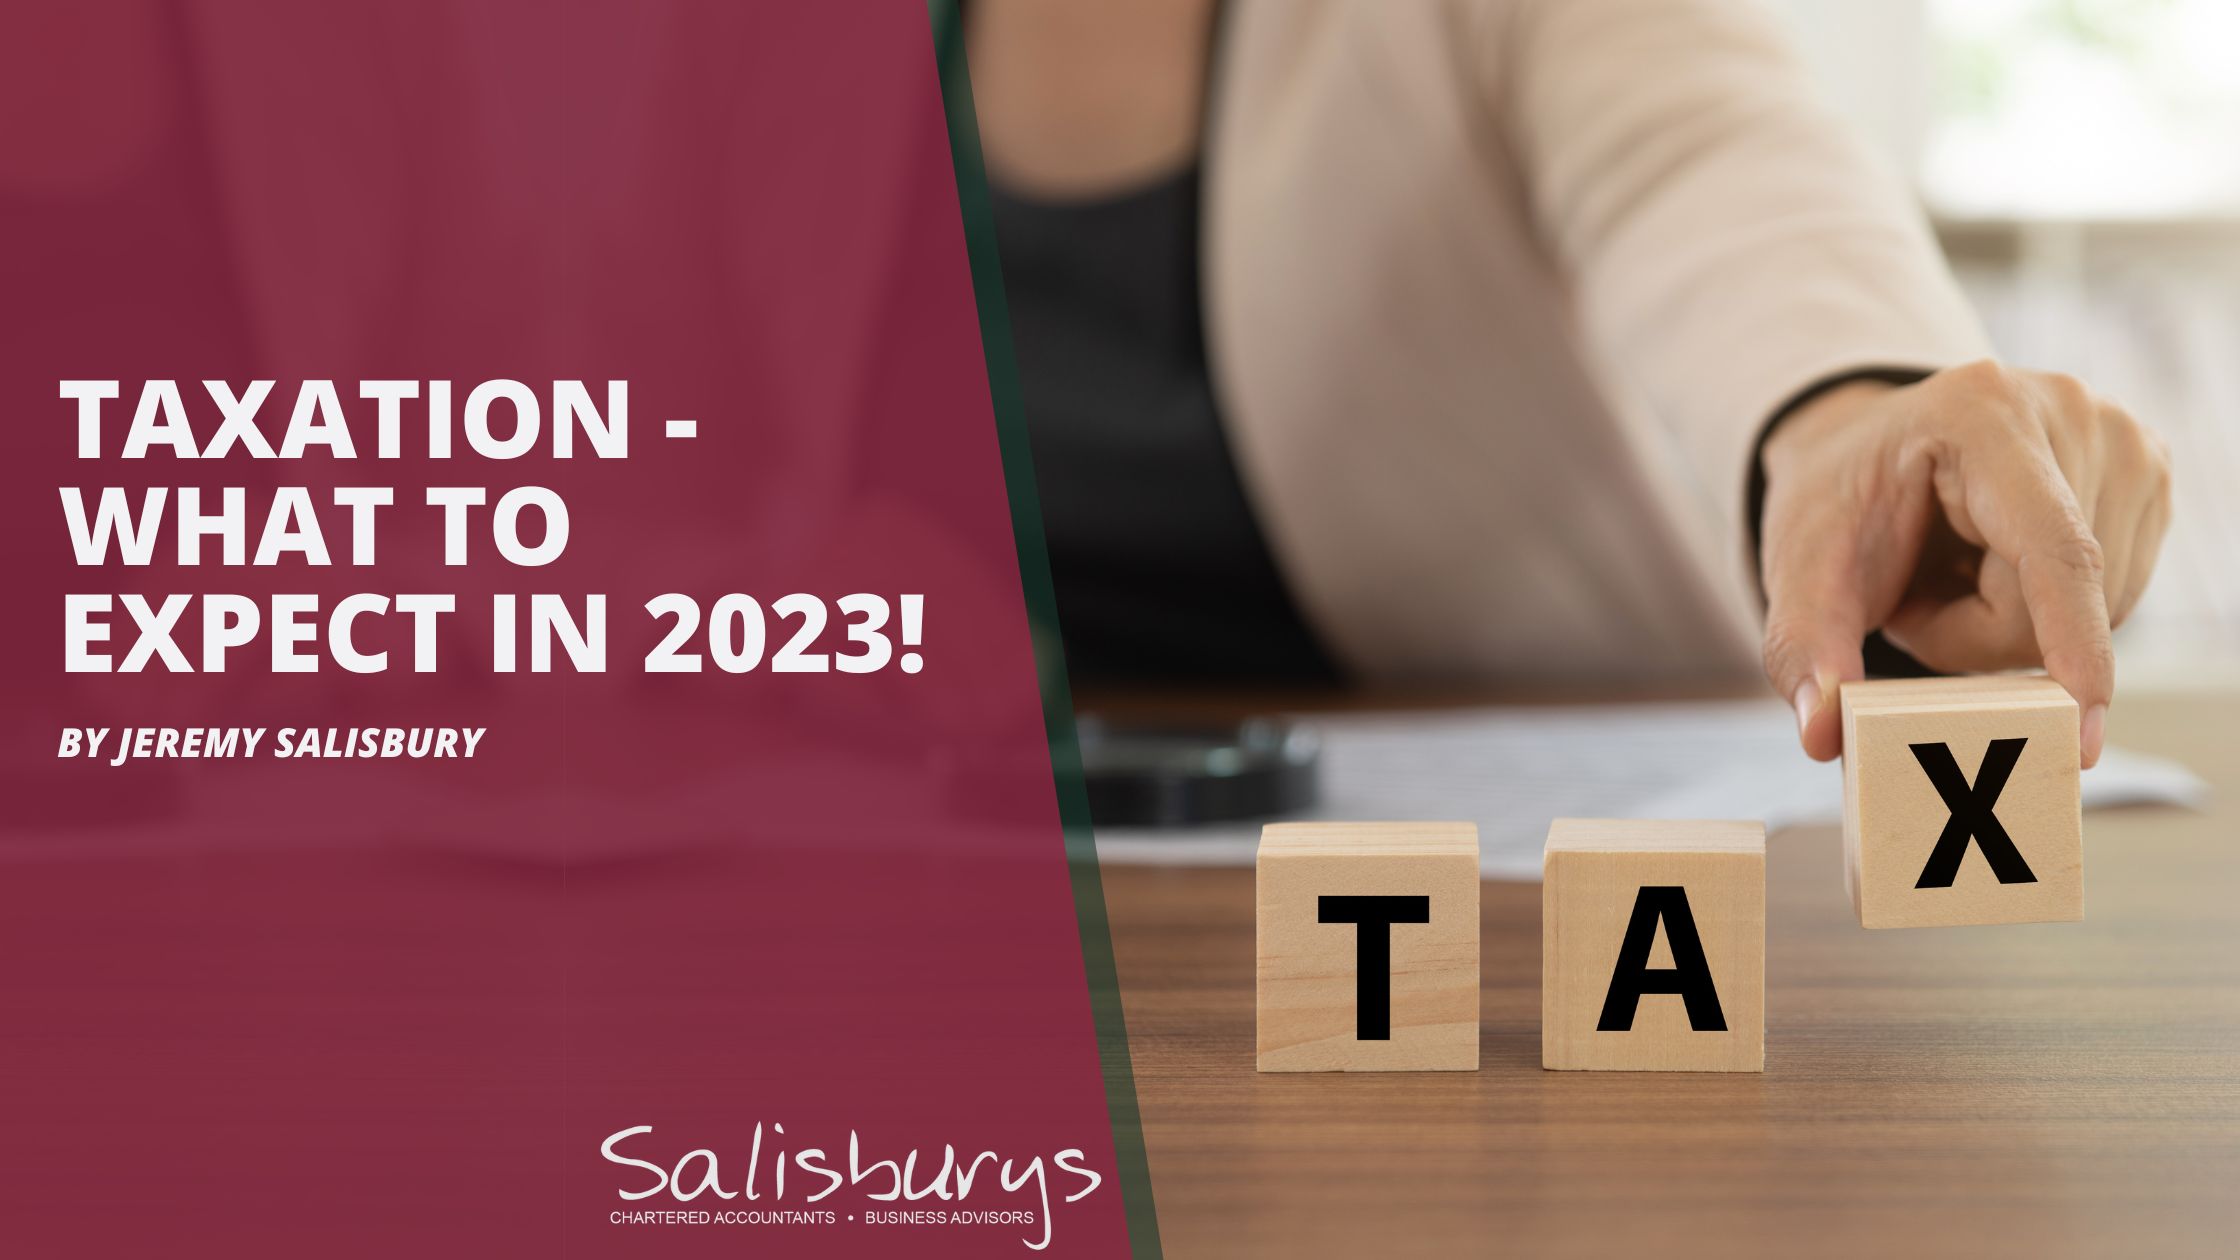 Taxation – What to Expect in 2023!